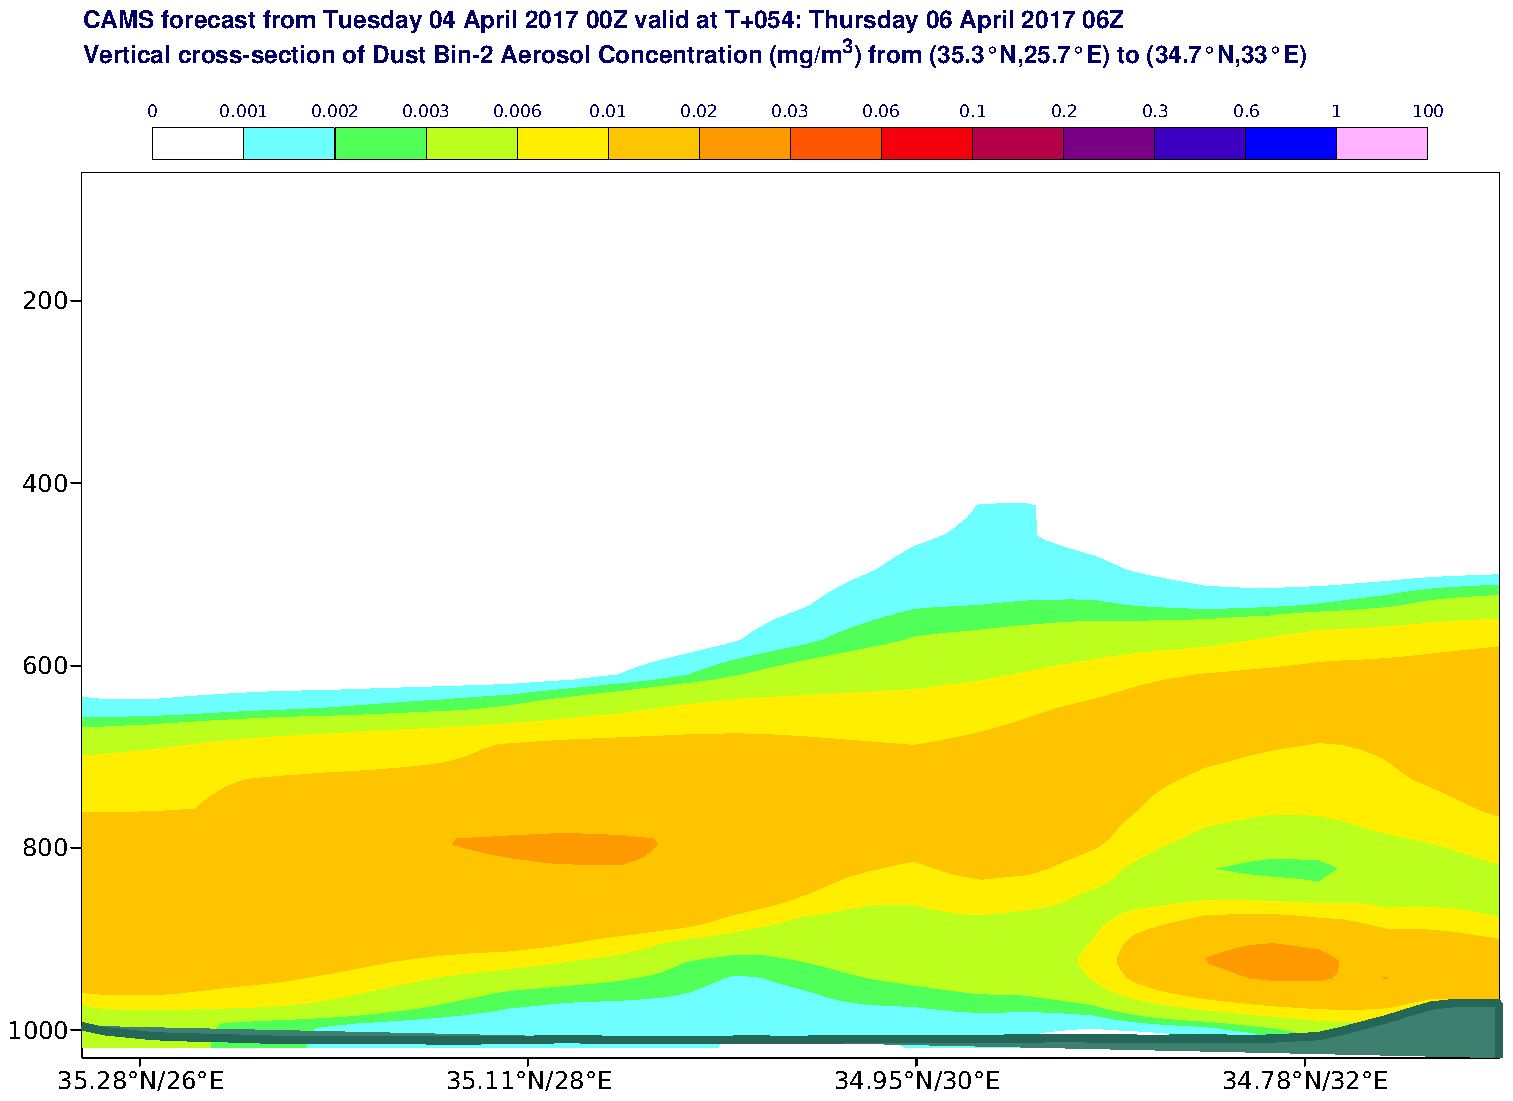 Vertical cross-section of Dust Bin-2 Aerosol Concentration (mg/m3) valid at T54 - 2017-04-06 06:00